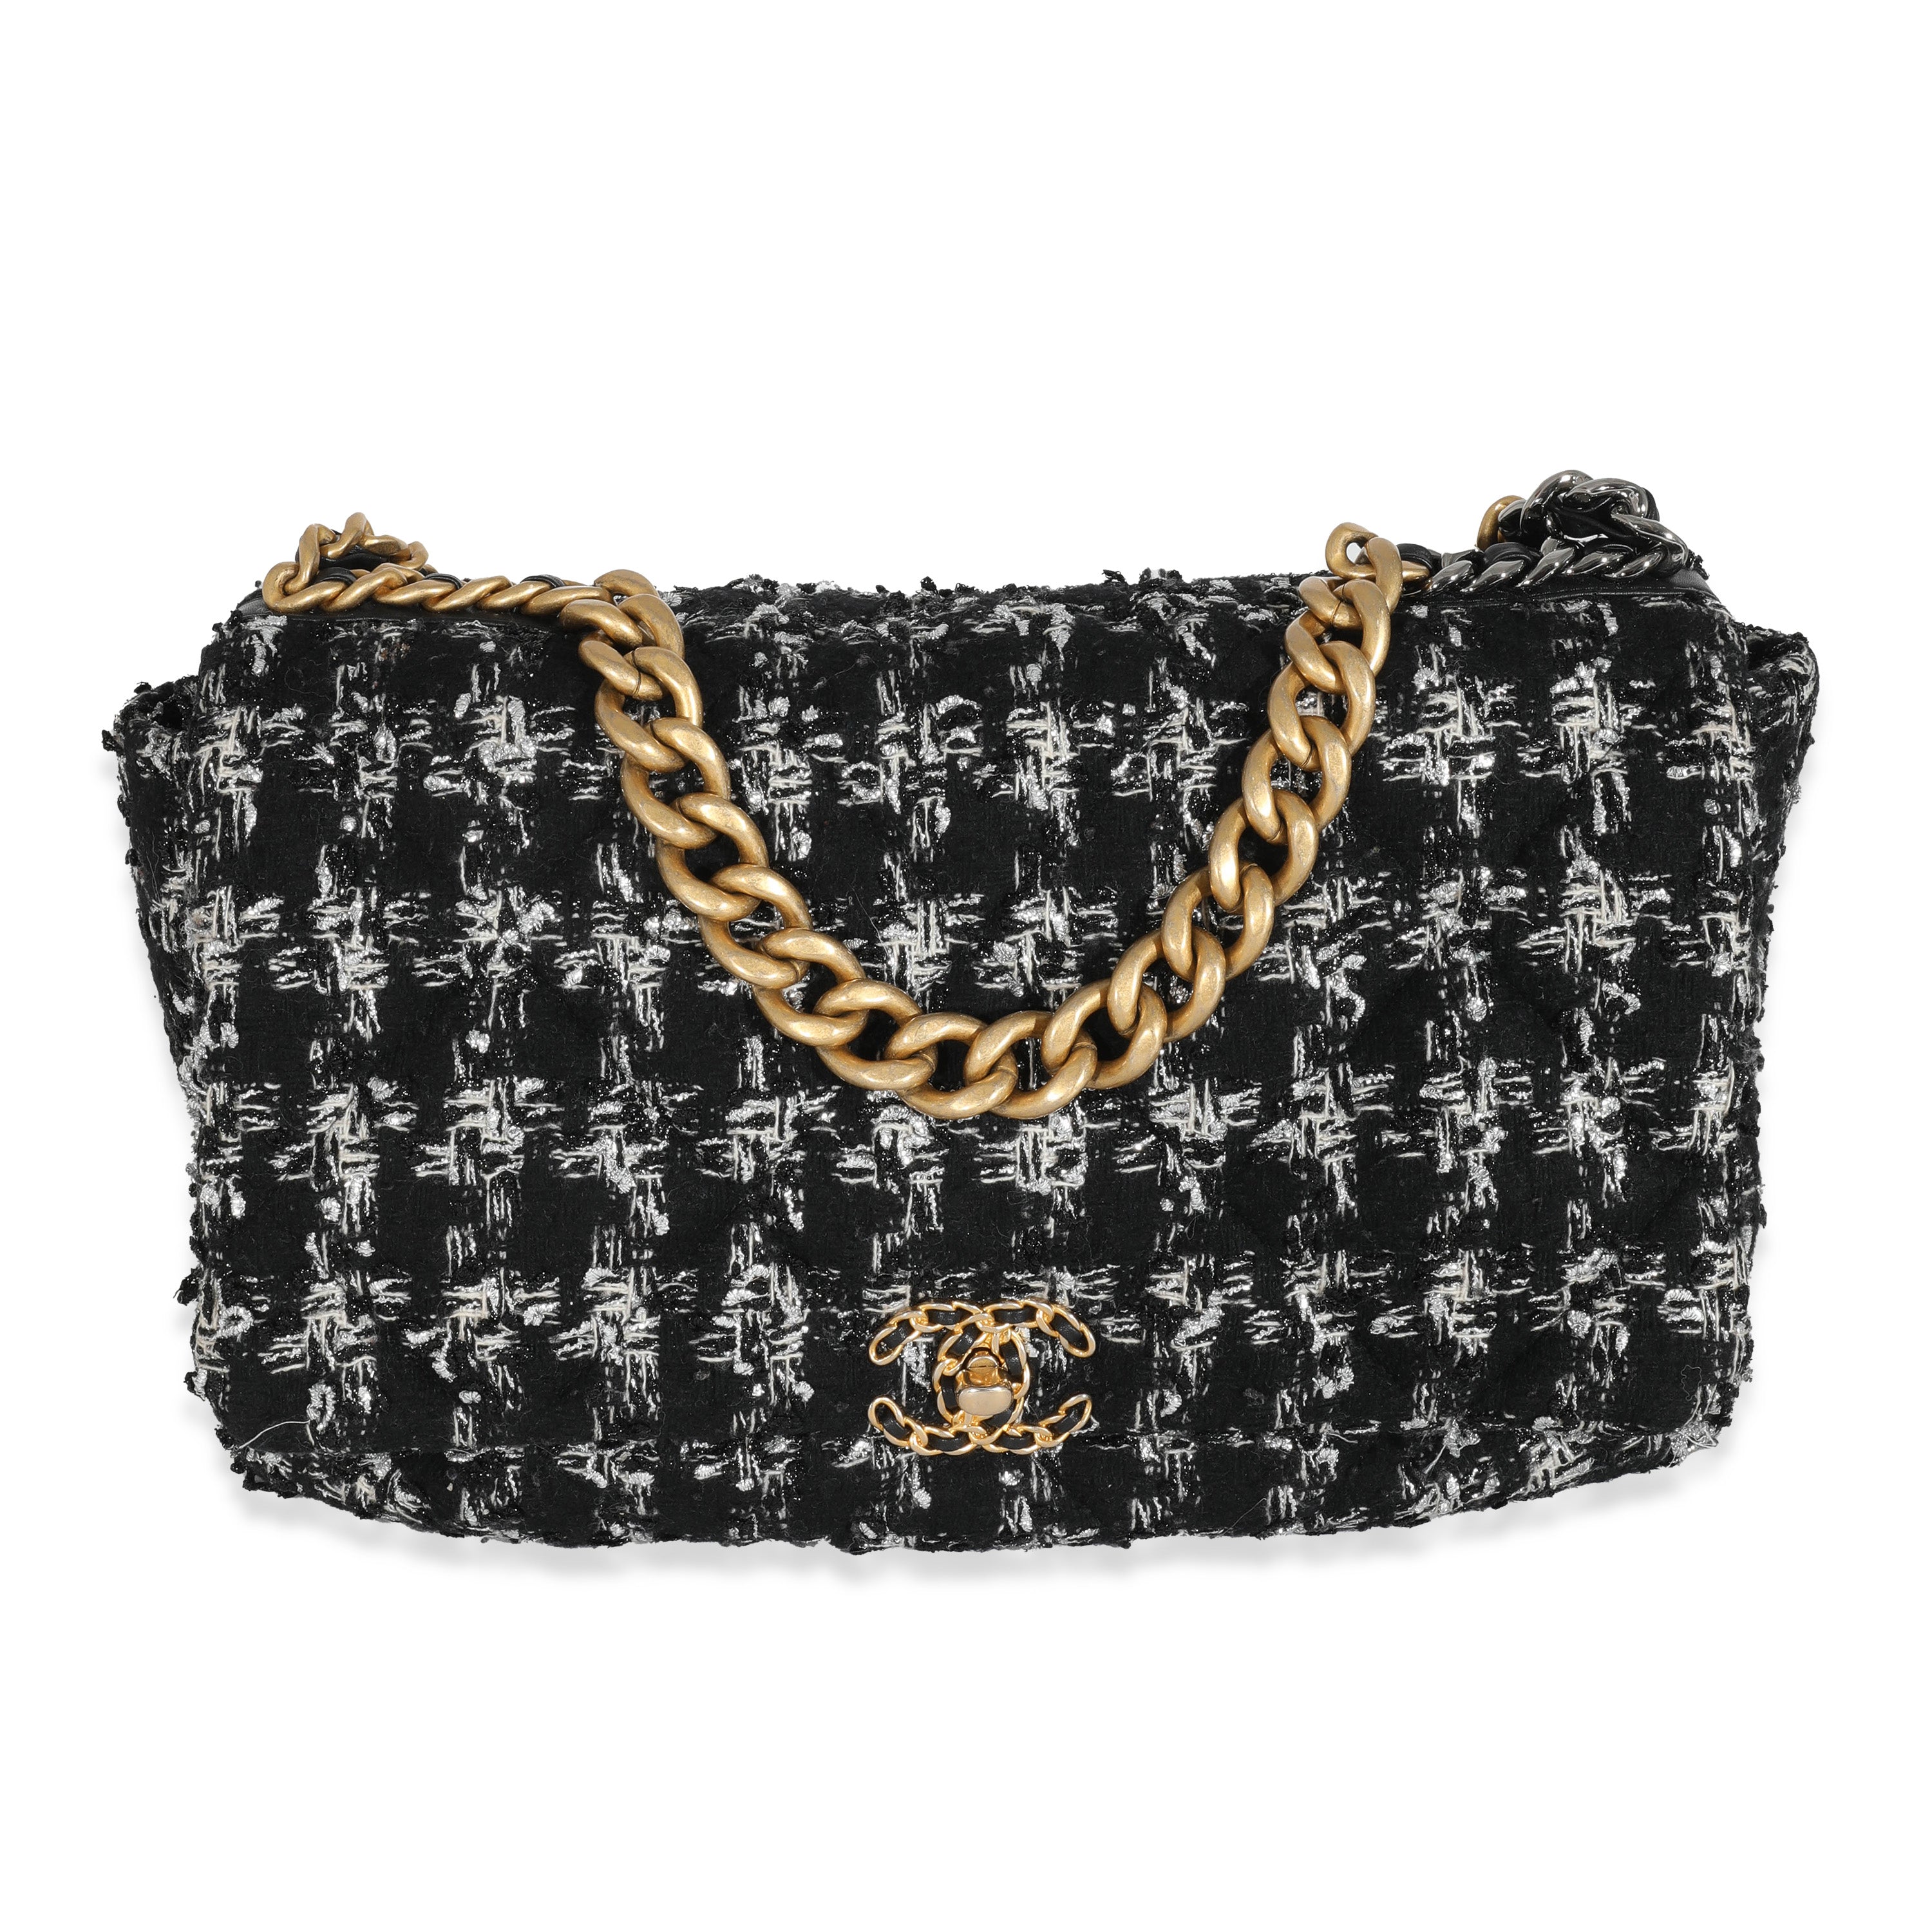 Chanel Black/White Quilted Tweed Chanel 19 Maxi Flap Bag - RvceShops's  Closet - Кроссовки италия кожа твид как chanel le si